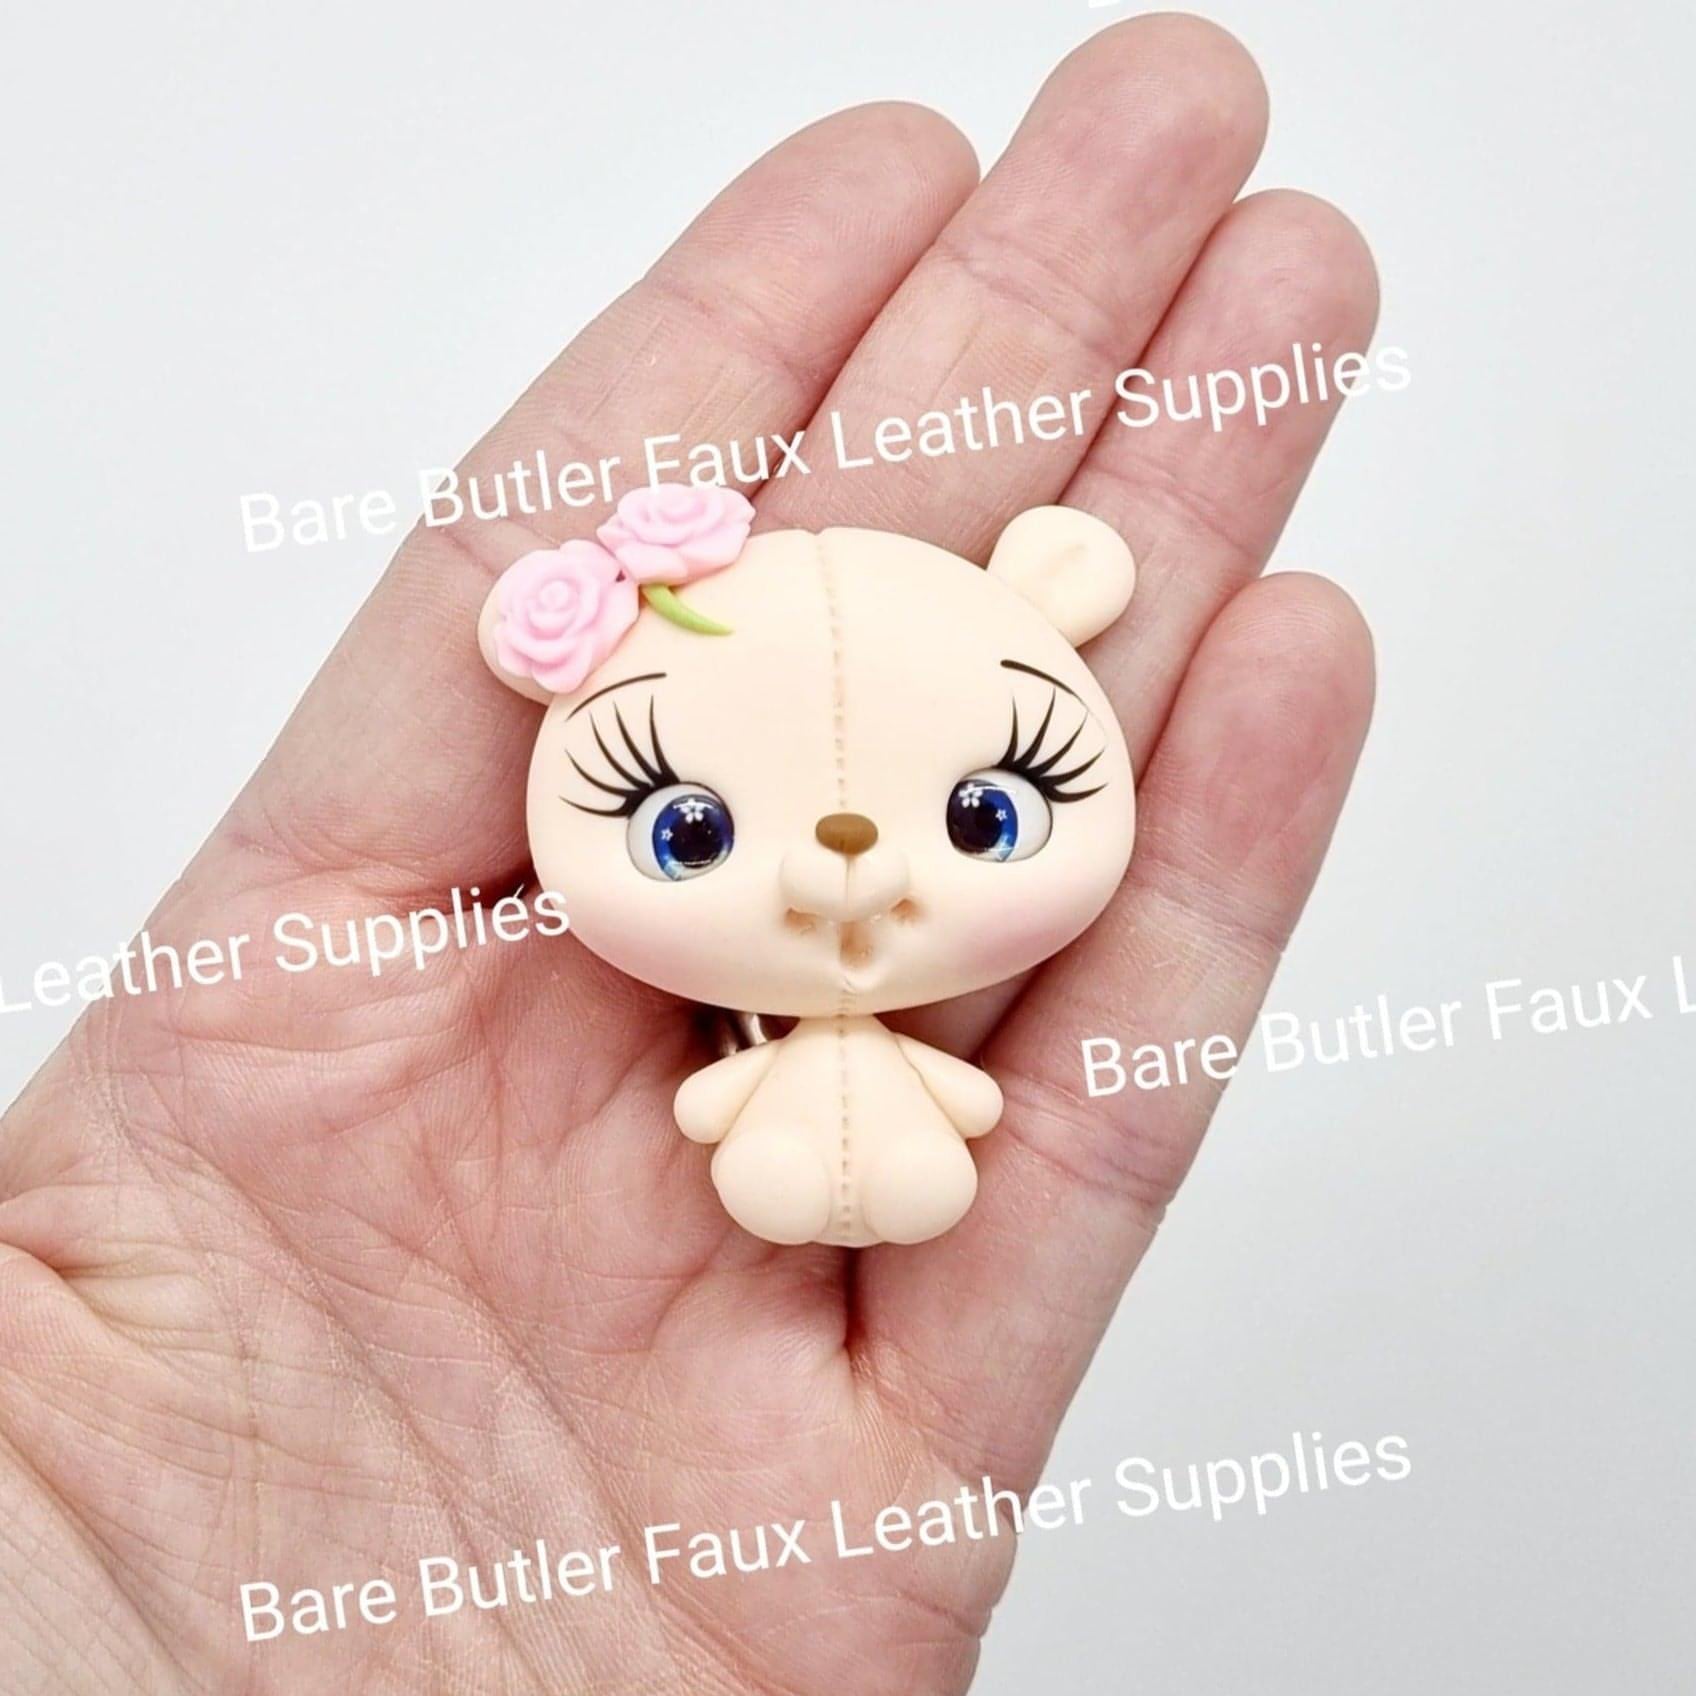 Teddy Bear - Bare Butler Faux Leather Supplies 